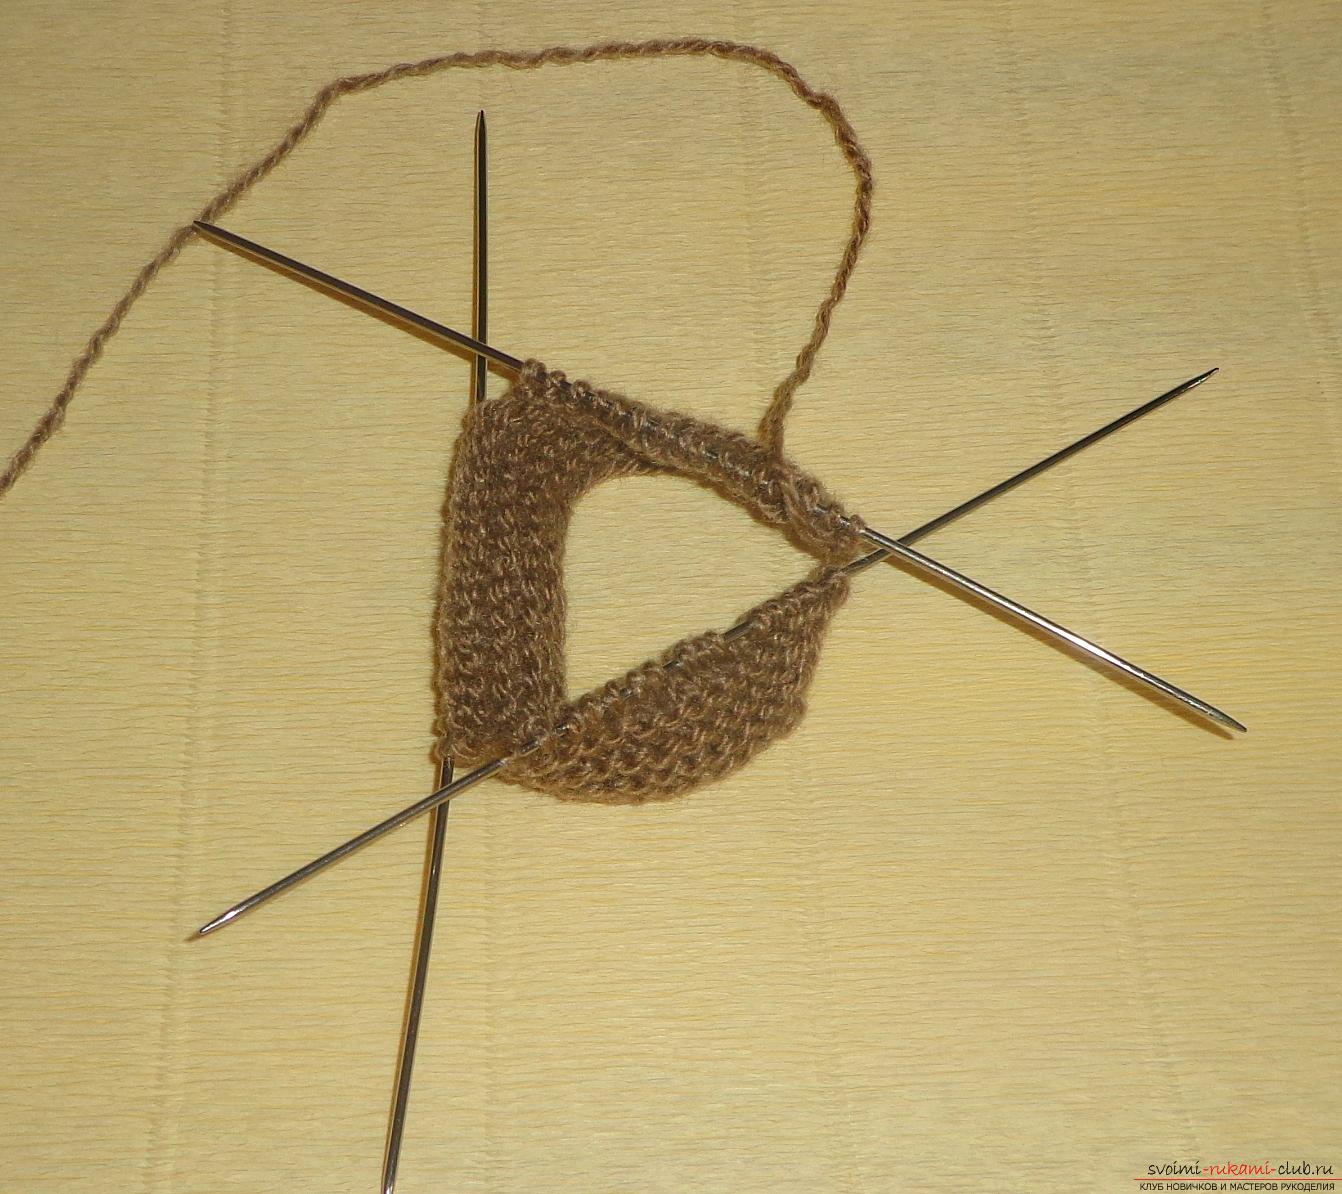 Photos for a lesson on knitting on knitting needles for a boy. Photo # 2